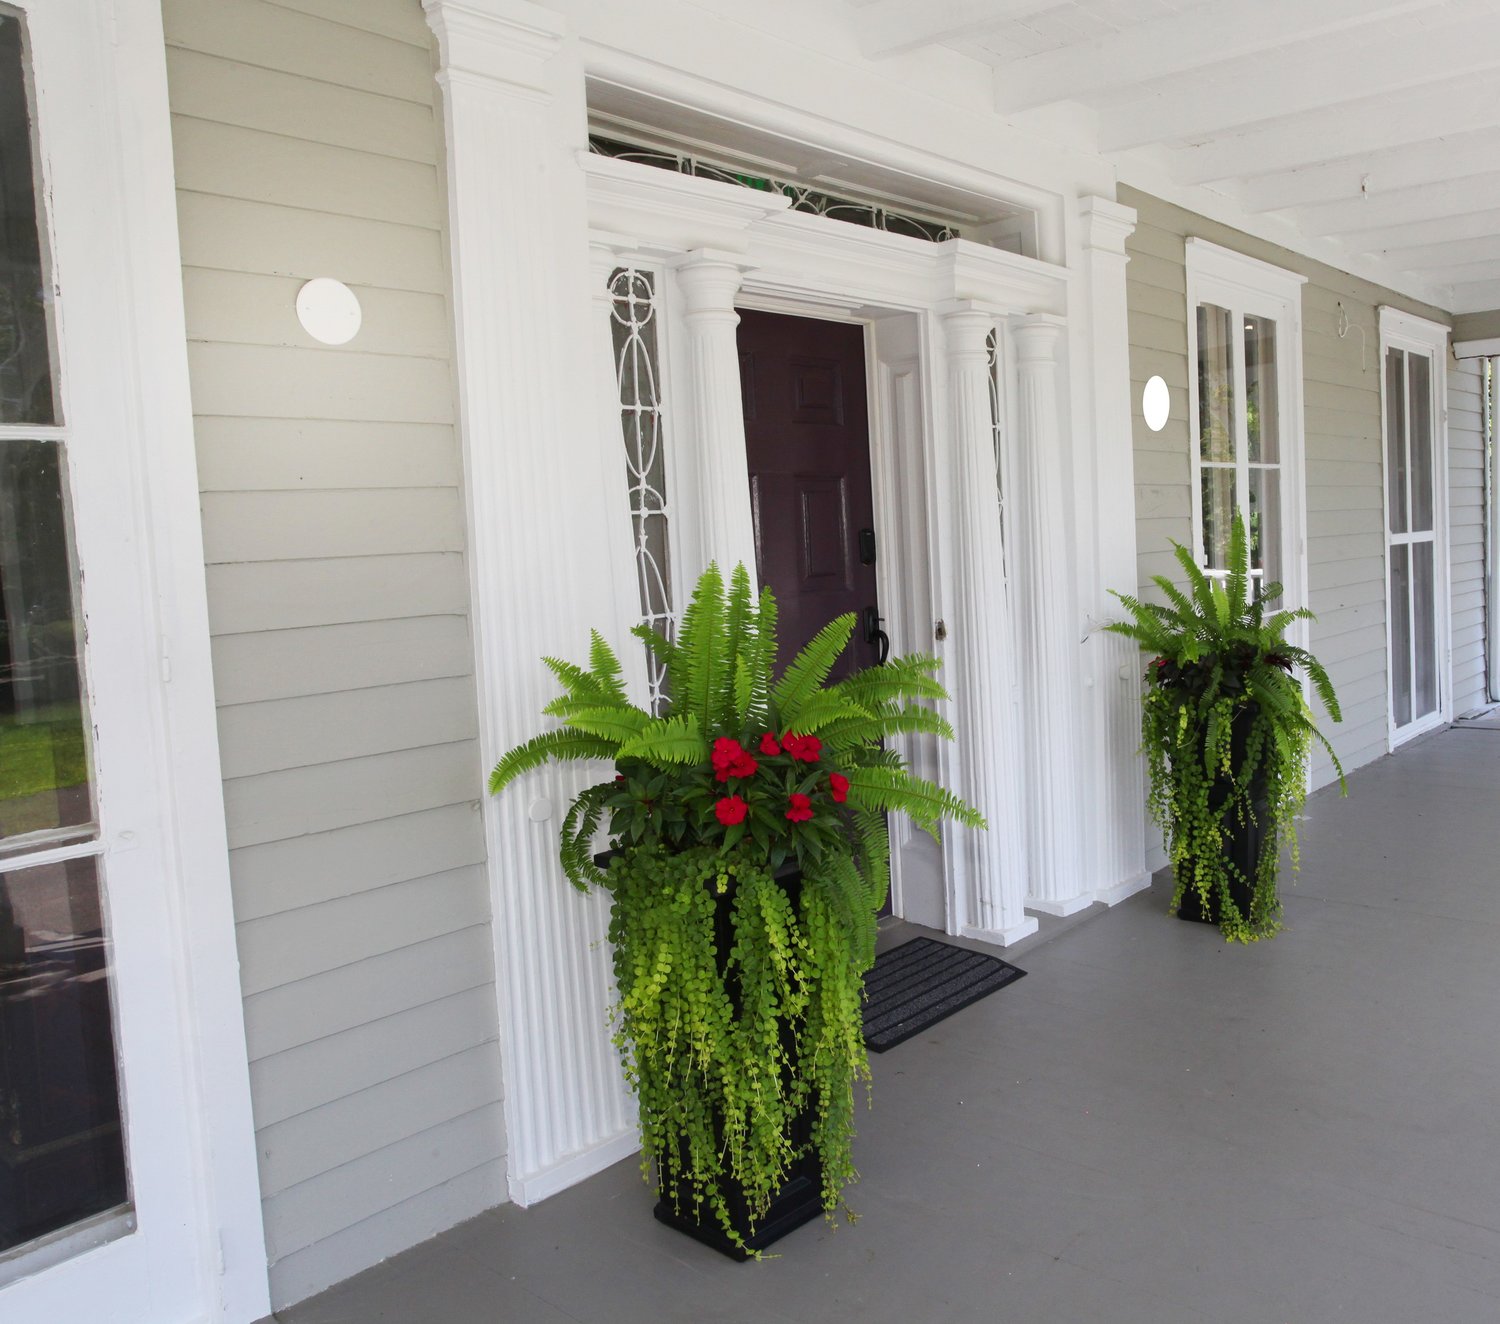 These pots flanking a front door are classic examples of Thriller, Filler, Spiller planting techniques.